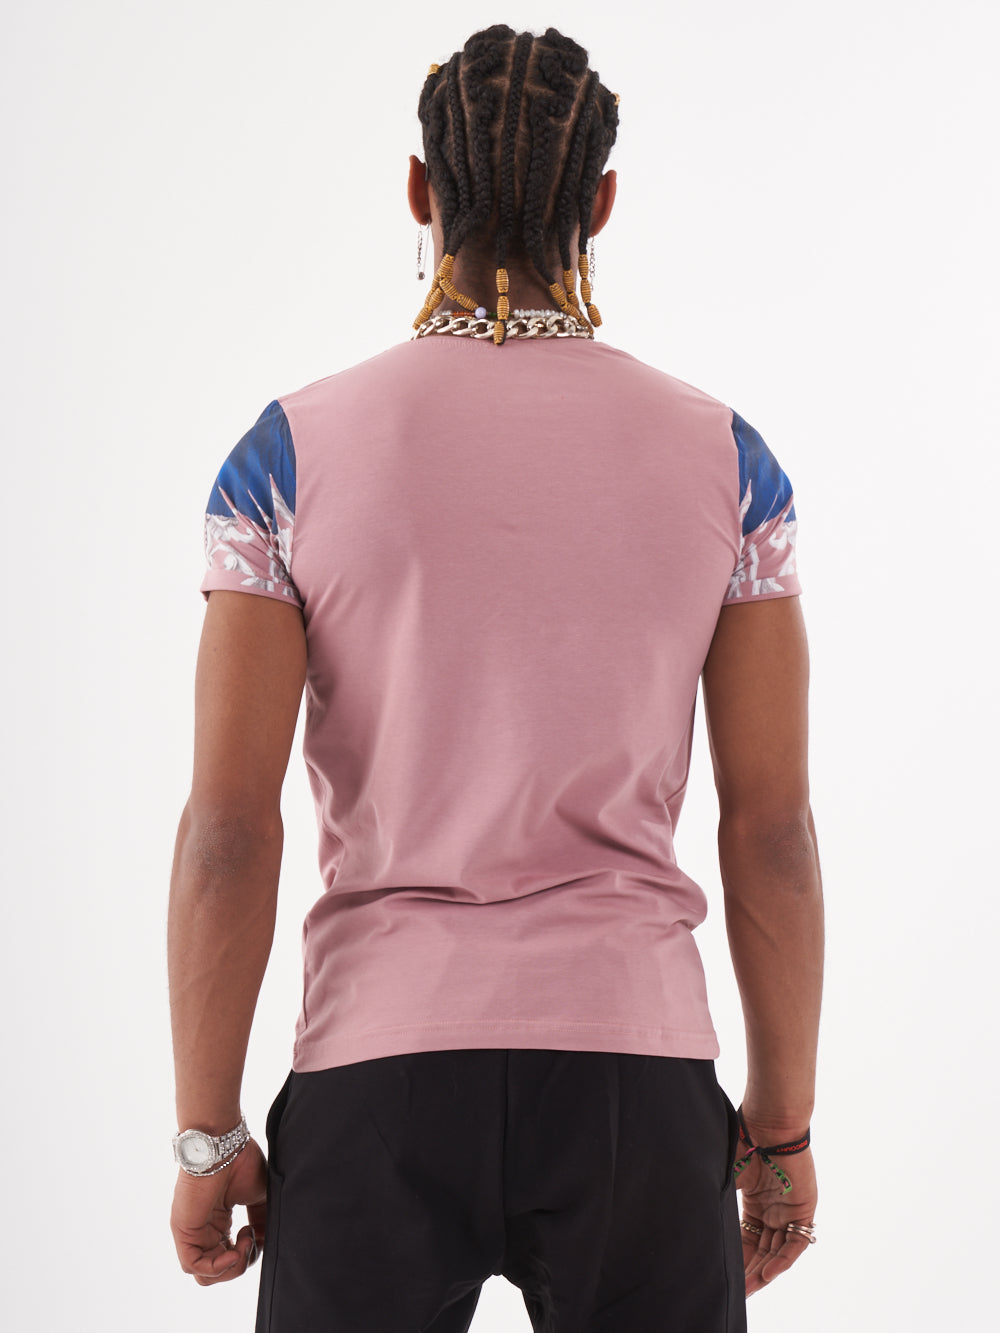 The back view of a man wearing a EUPHORIA T-SHIRT | MAUVE featuring a skeleton print.